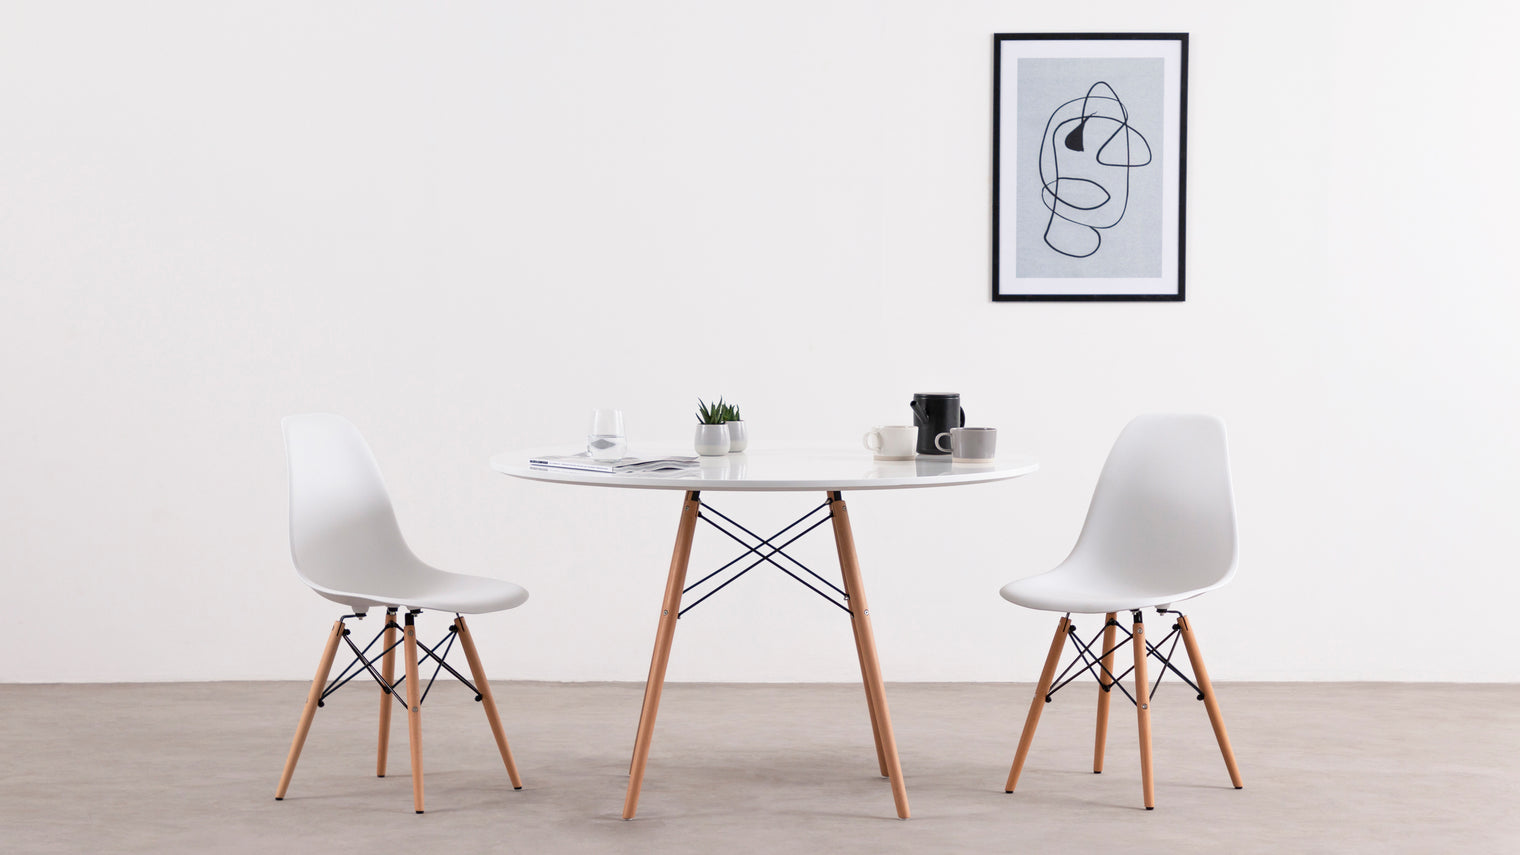 Stylize your space|Minimalism meets luxury with this simply divine design. Elevate your kitchen or dining room effortlessly, or add this table to an office or den as a modern alternative to the traditional desk.
